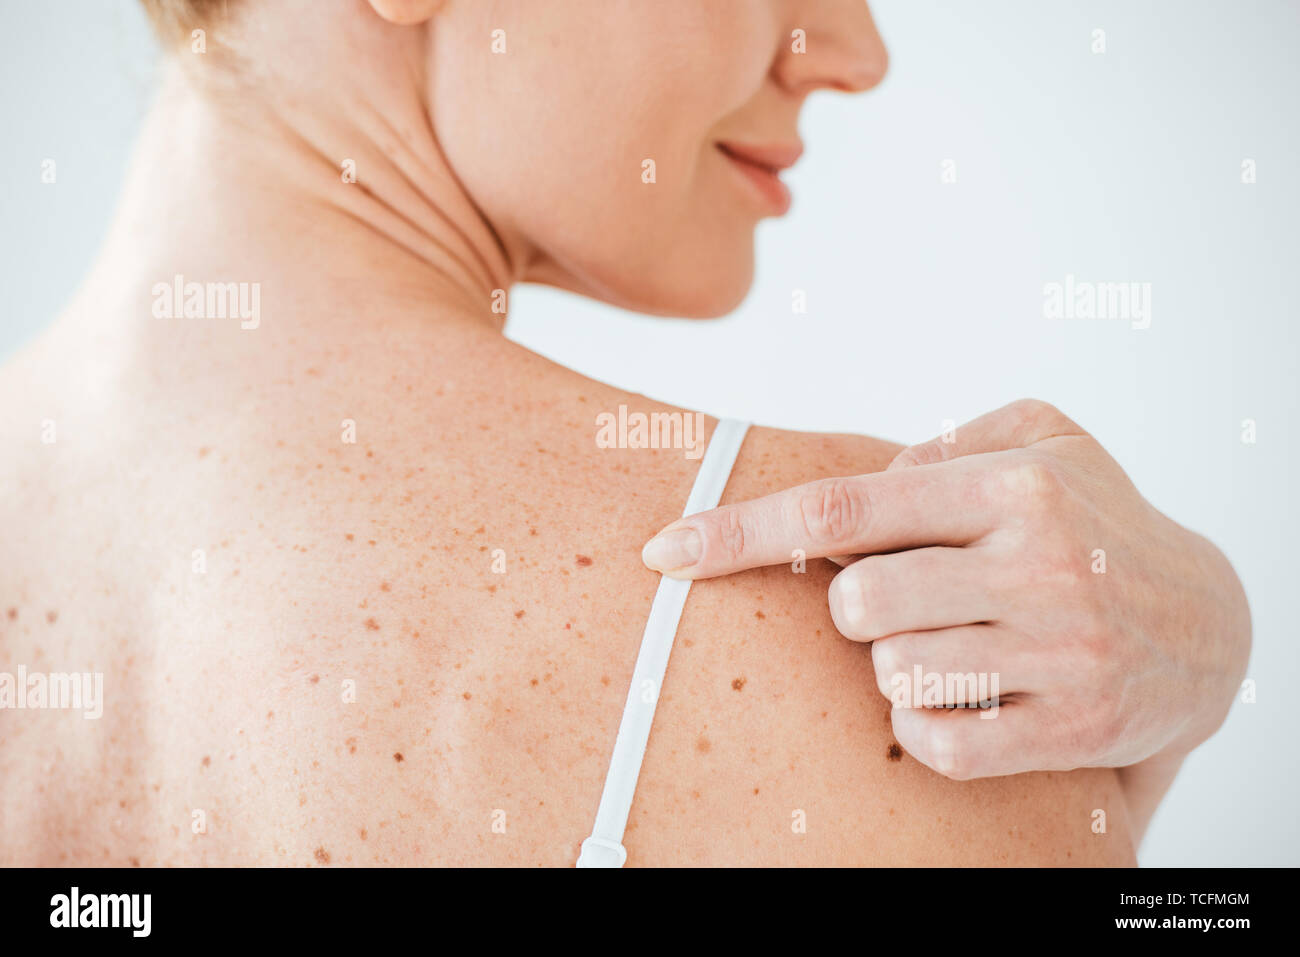 A skin tag or acrochordon on a person's buttocks Stock Photo - Alamy